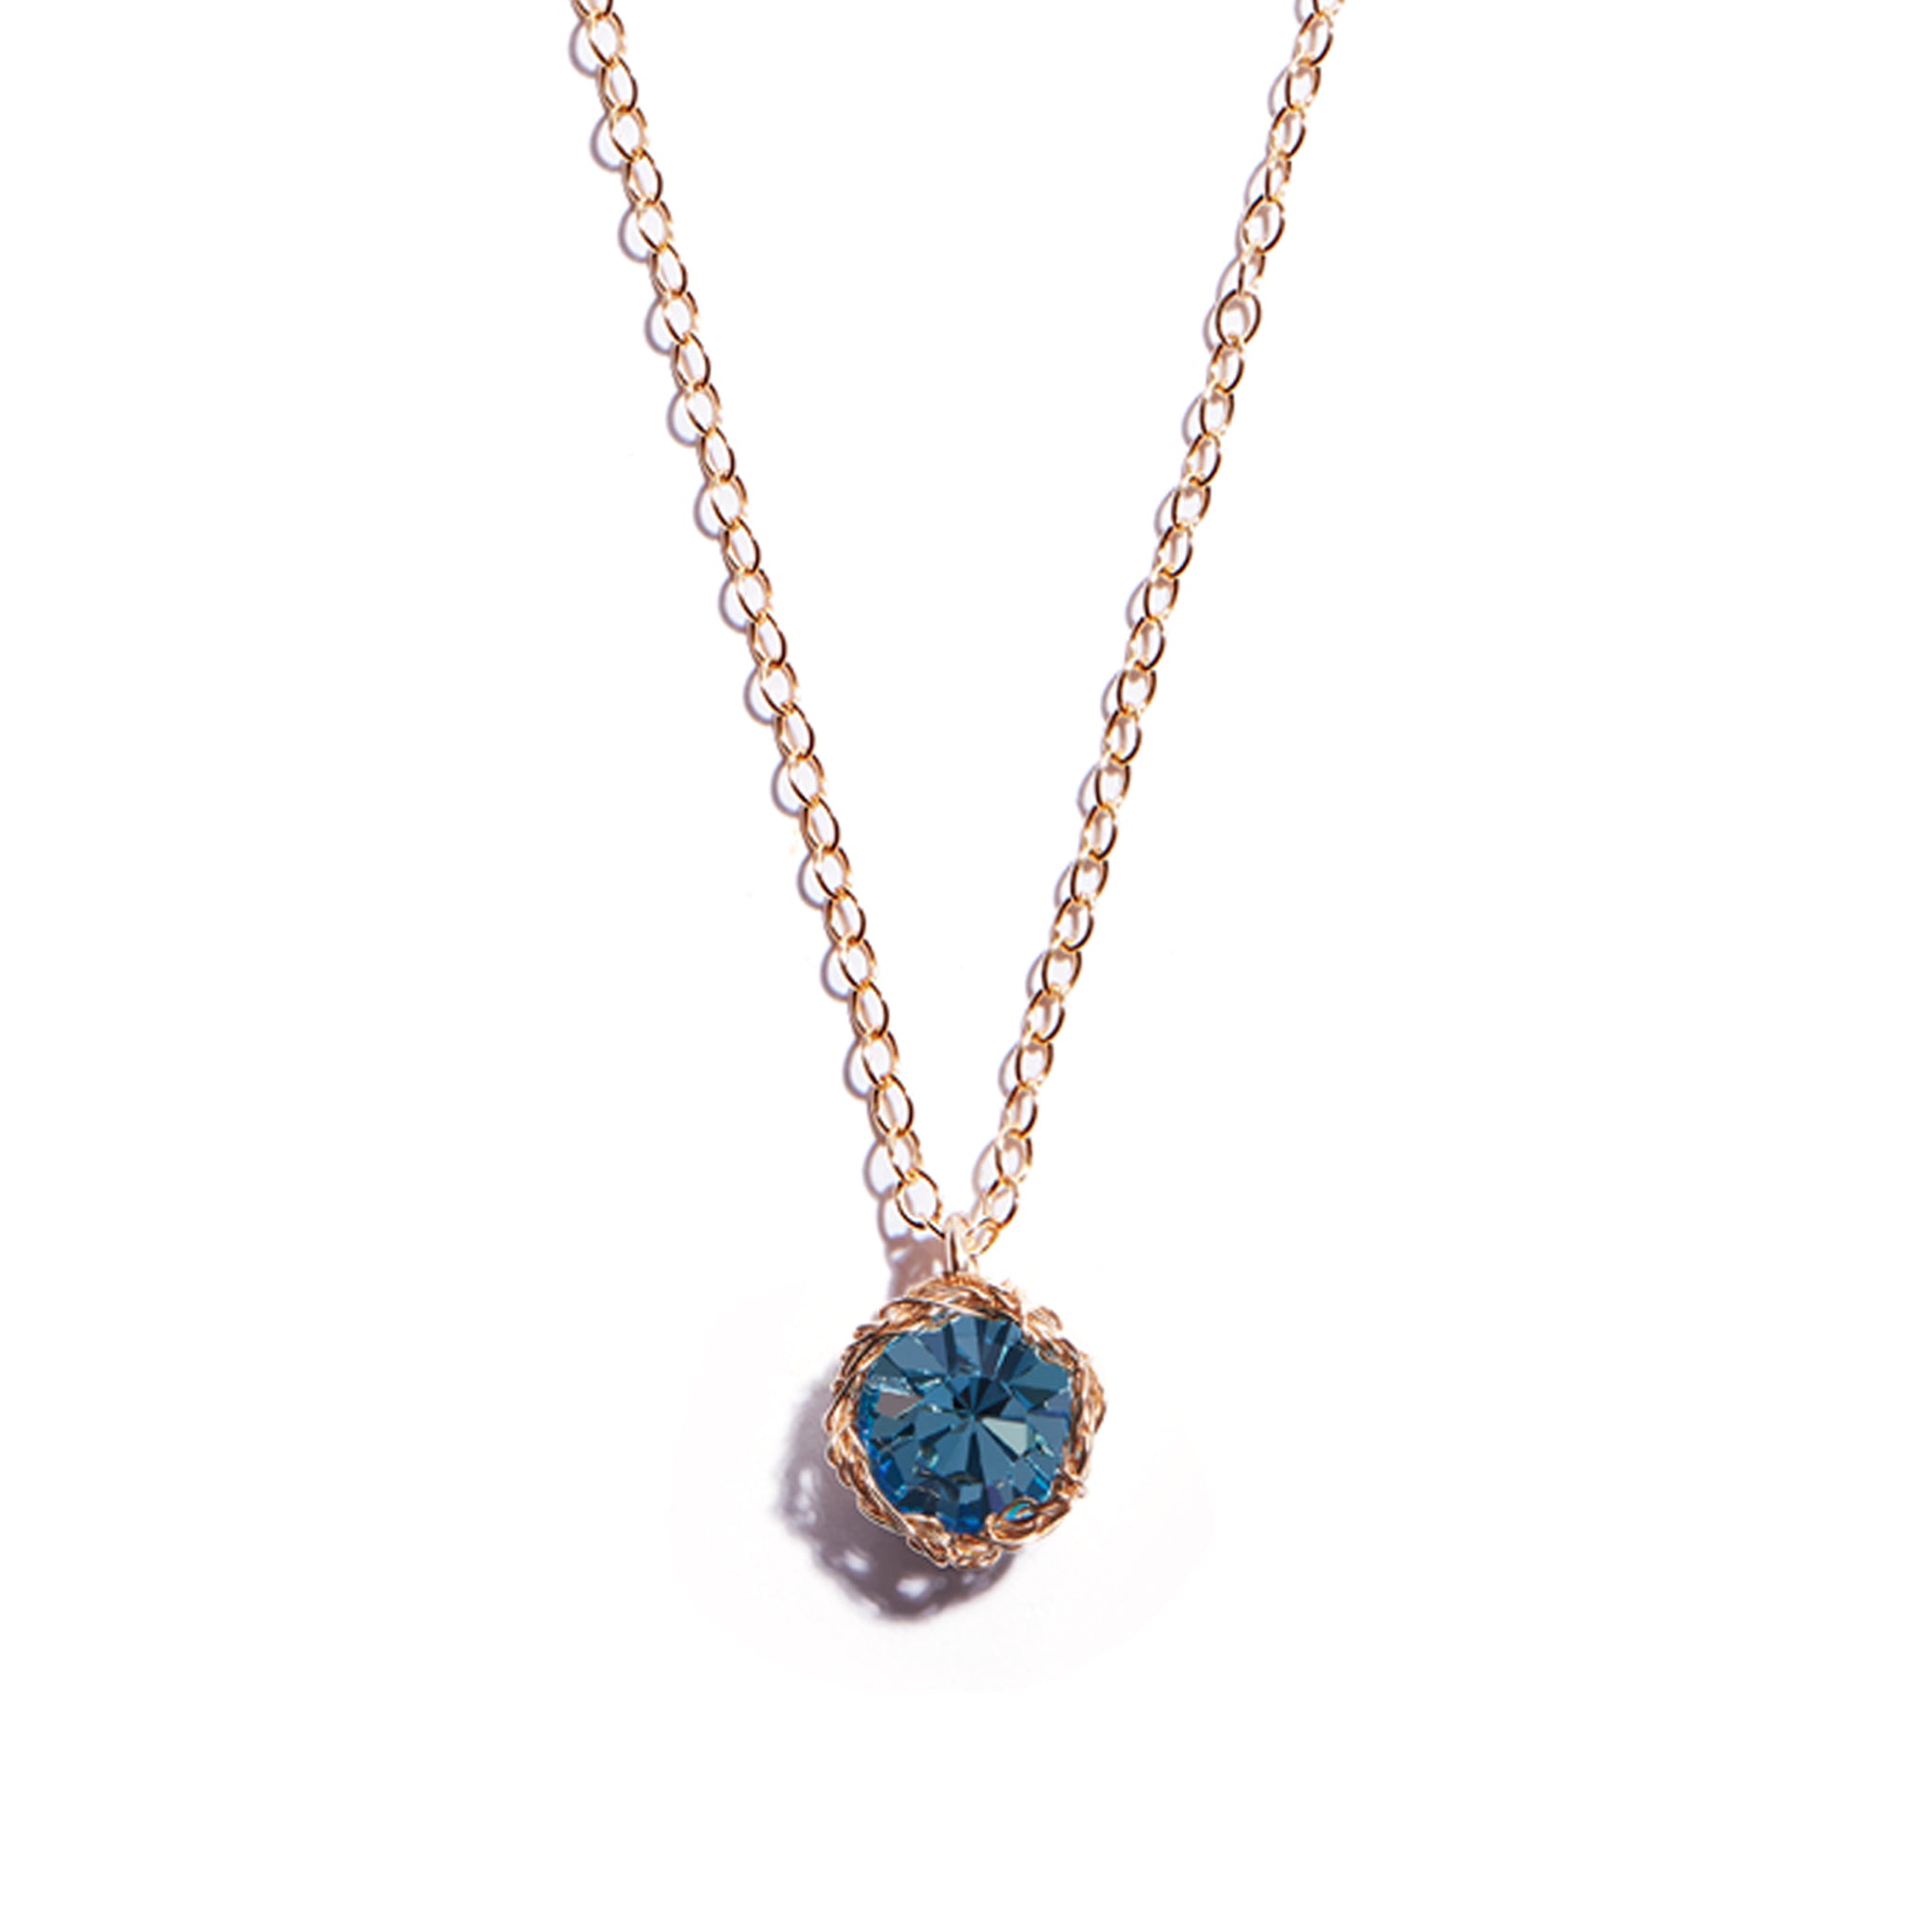 Close-up photo of a crochet necklace featuring a March birthstone pendant made of aquamarine, set in 14 ct gold-filled metal.